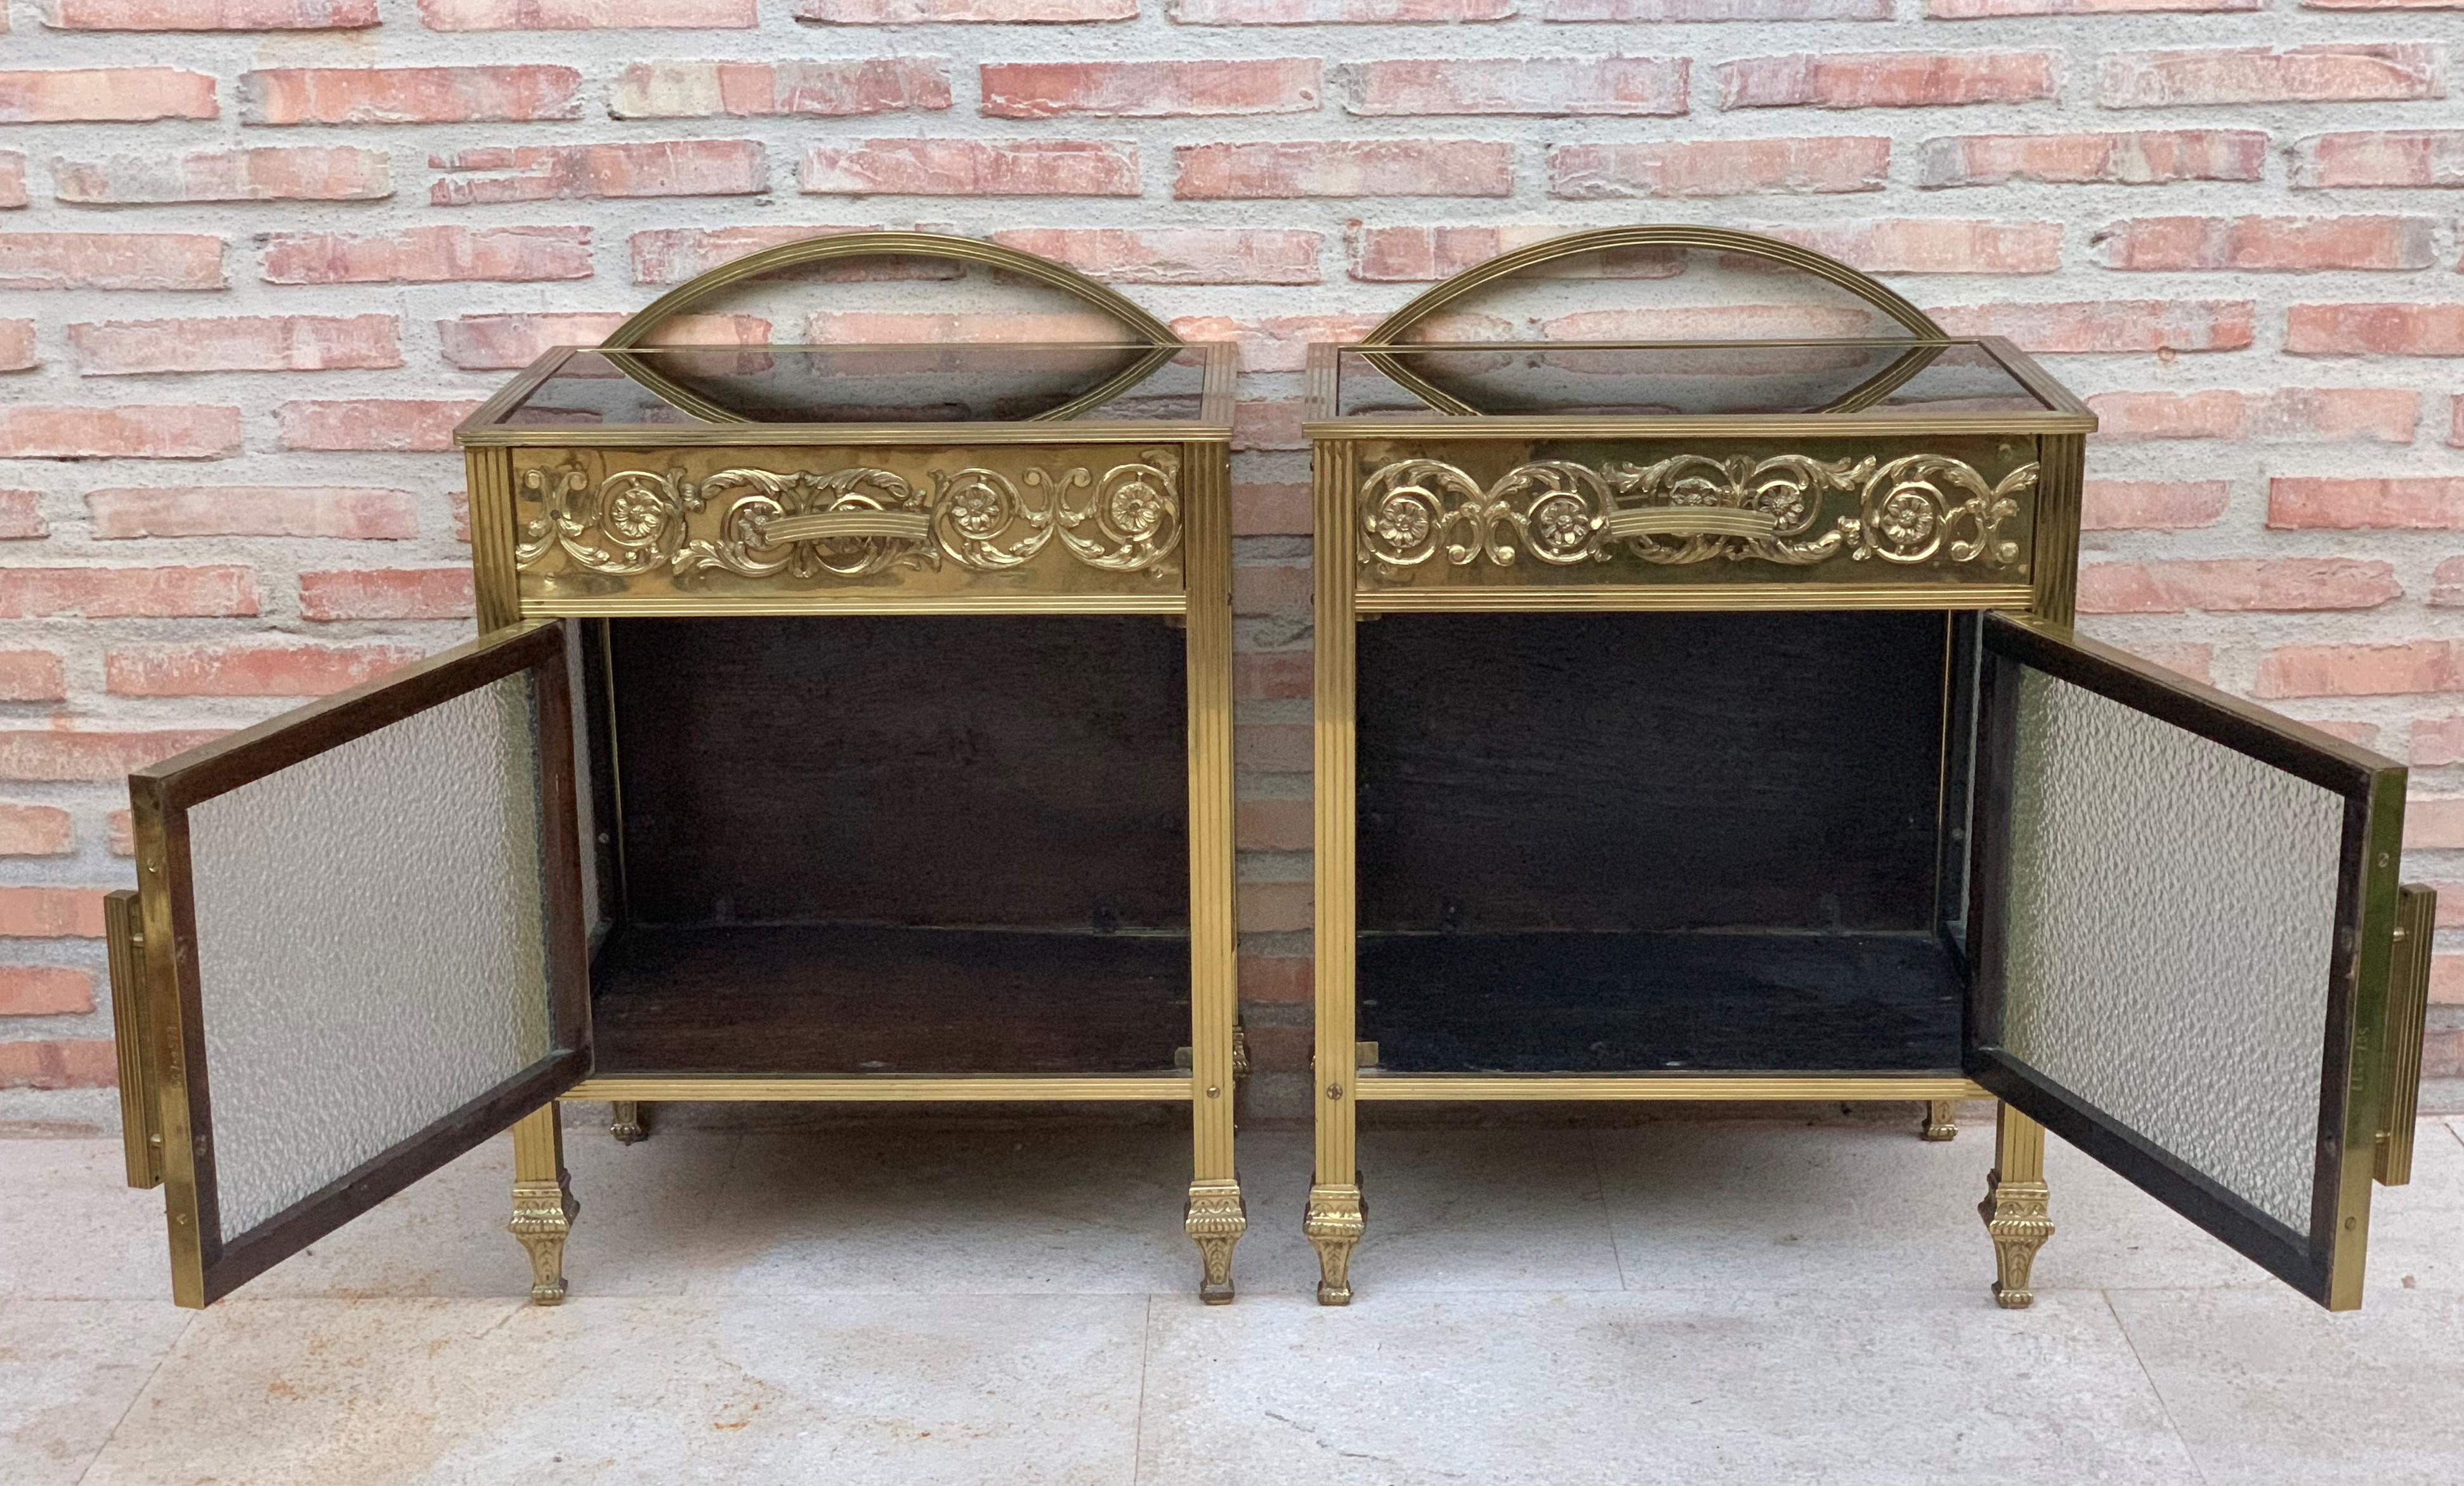 20th century pair of bronze nightstands with glass door and drawers.

This bronze or glass vitrine cabinet or nightstand is simply stunning and constructed of the finest quality. The bronze mounts of Fine form with a single drawer over an open